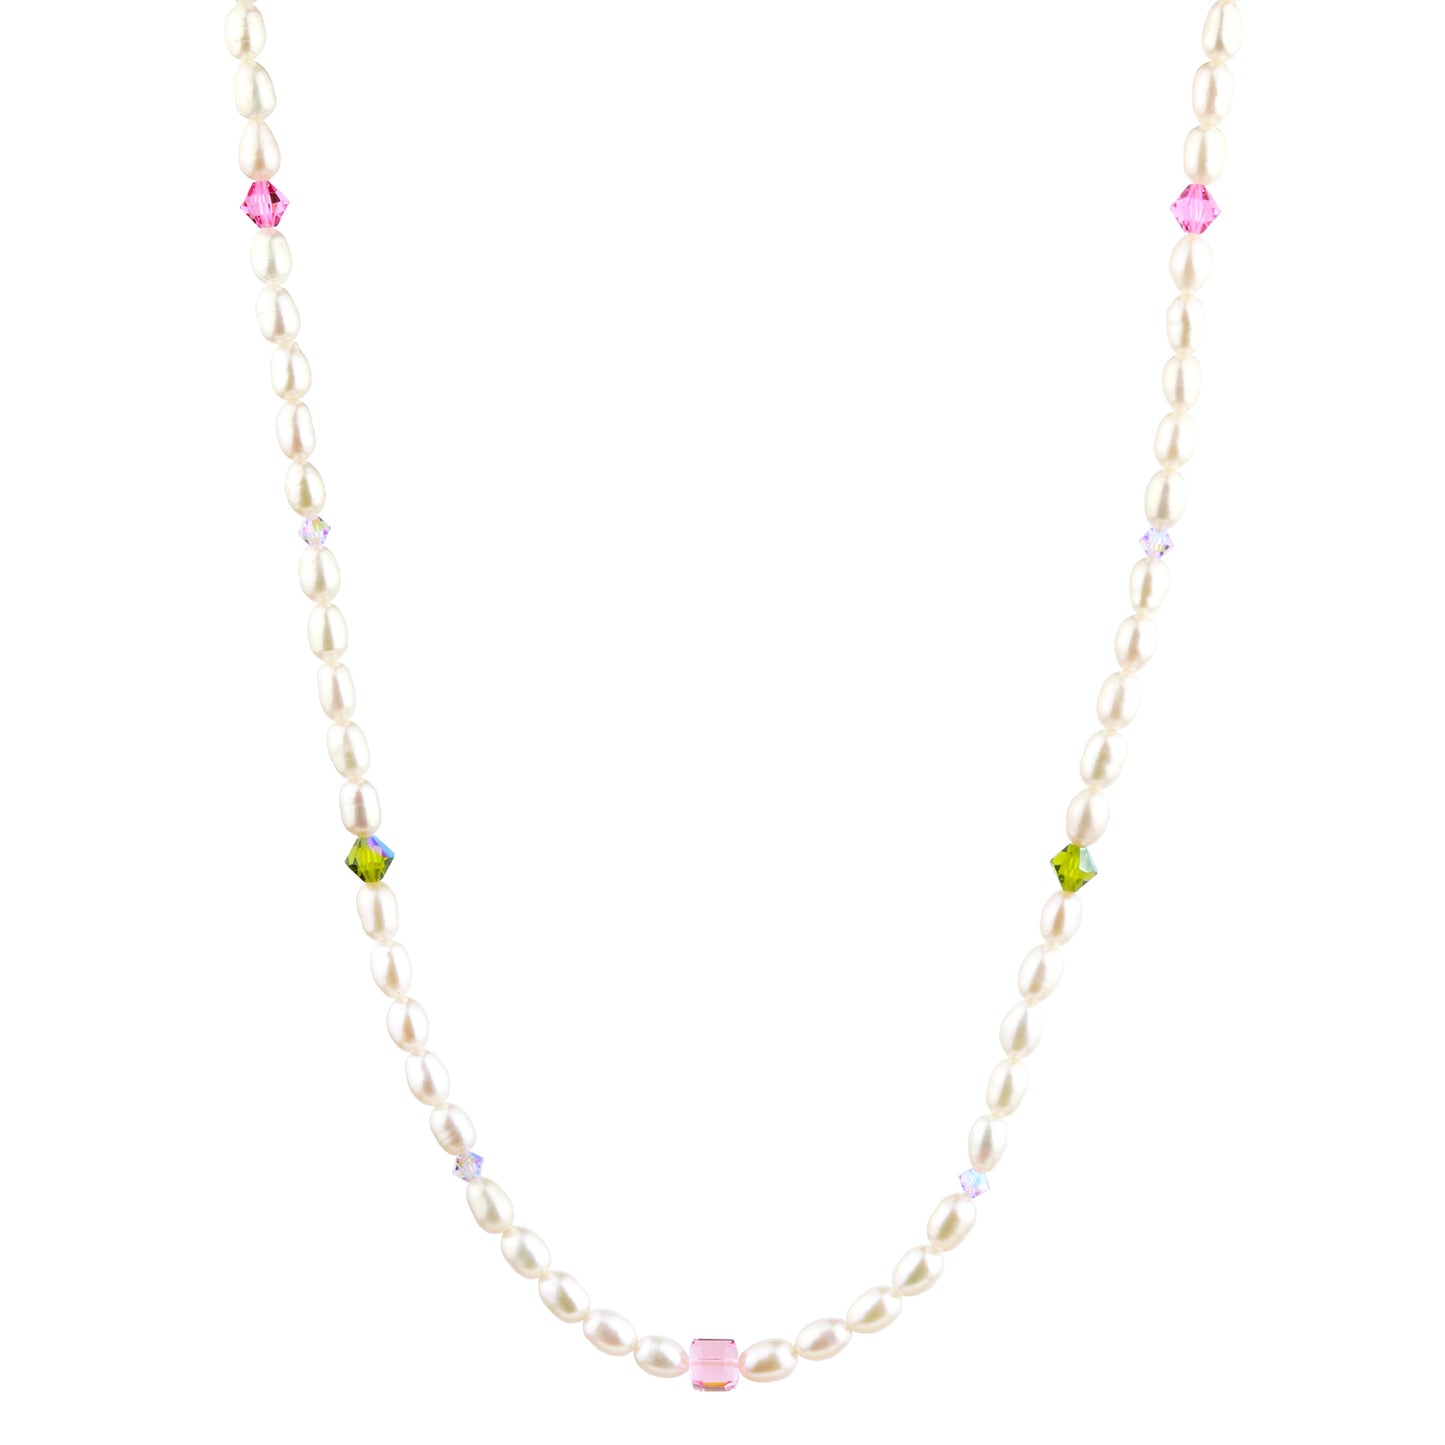 Helena Rice Pearl Necklace in Pastel Garden